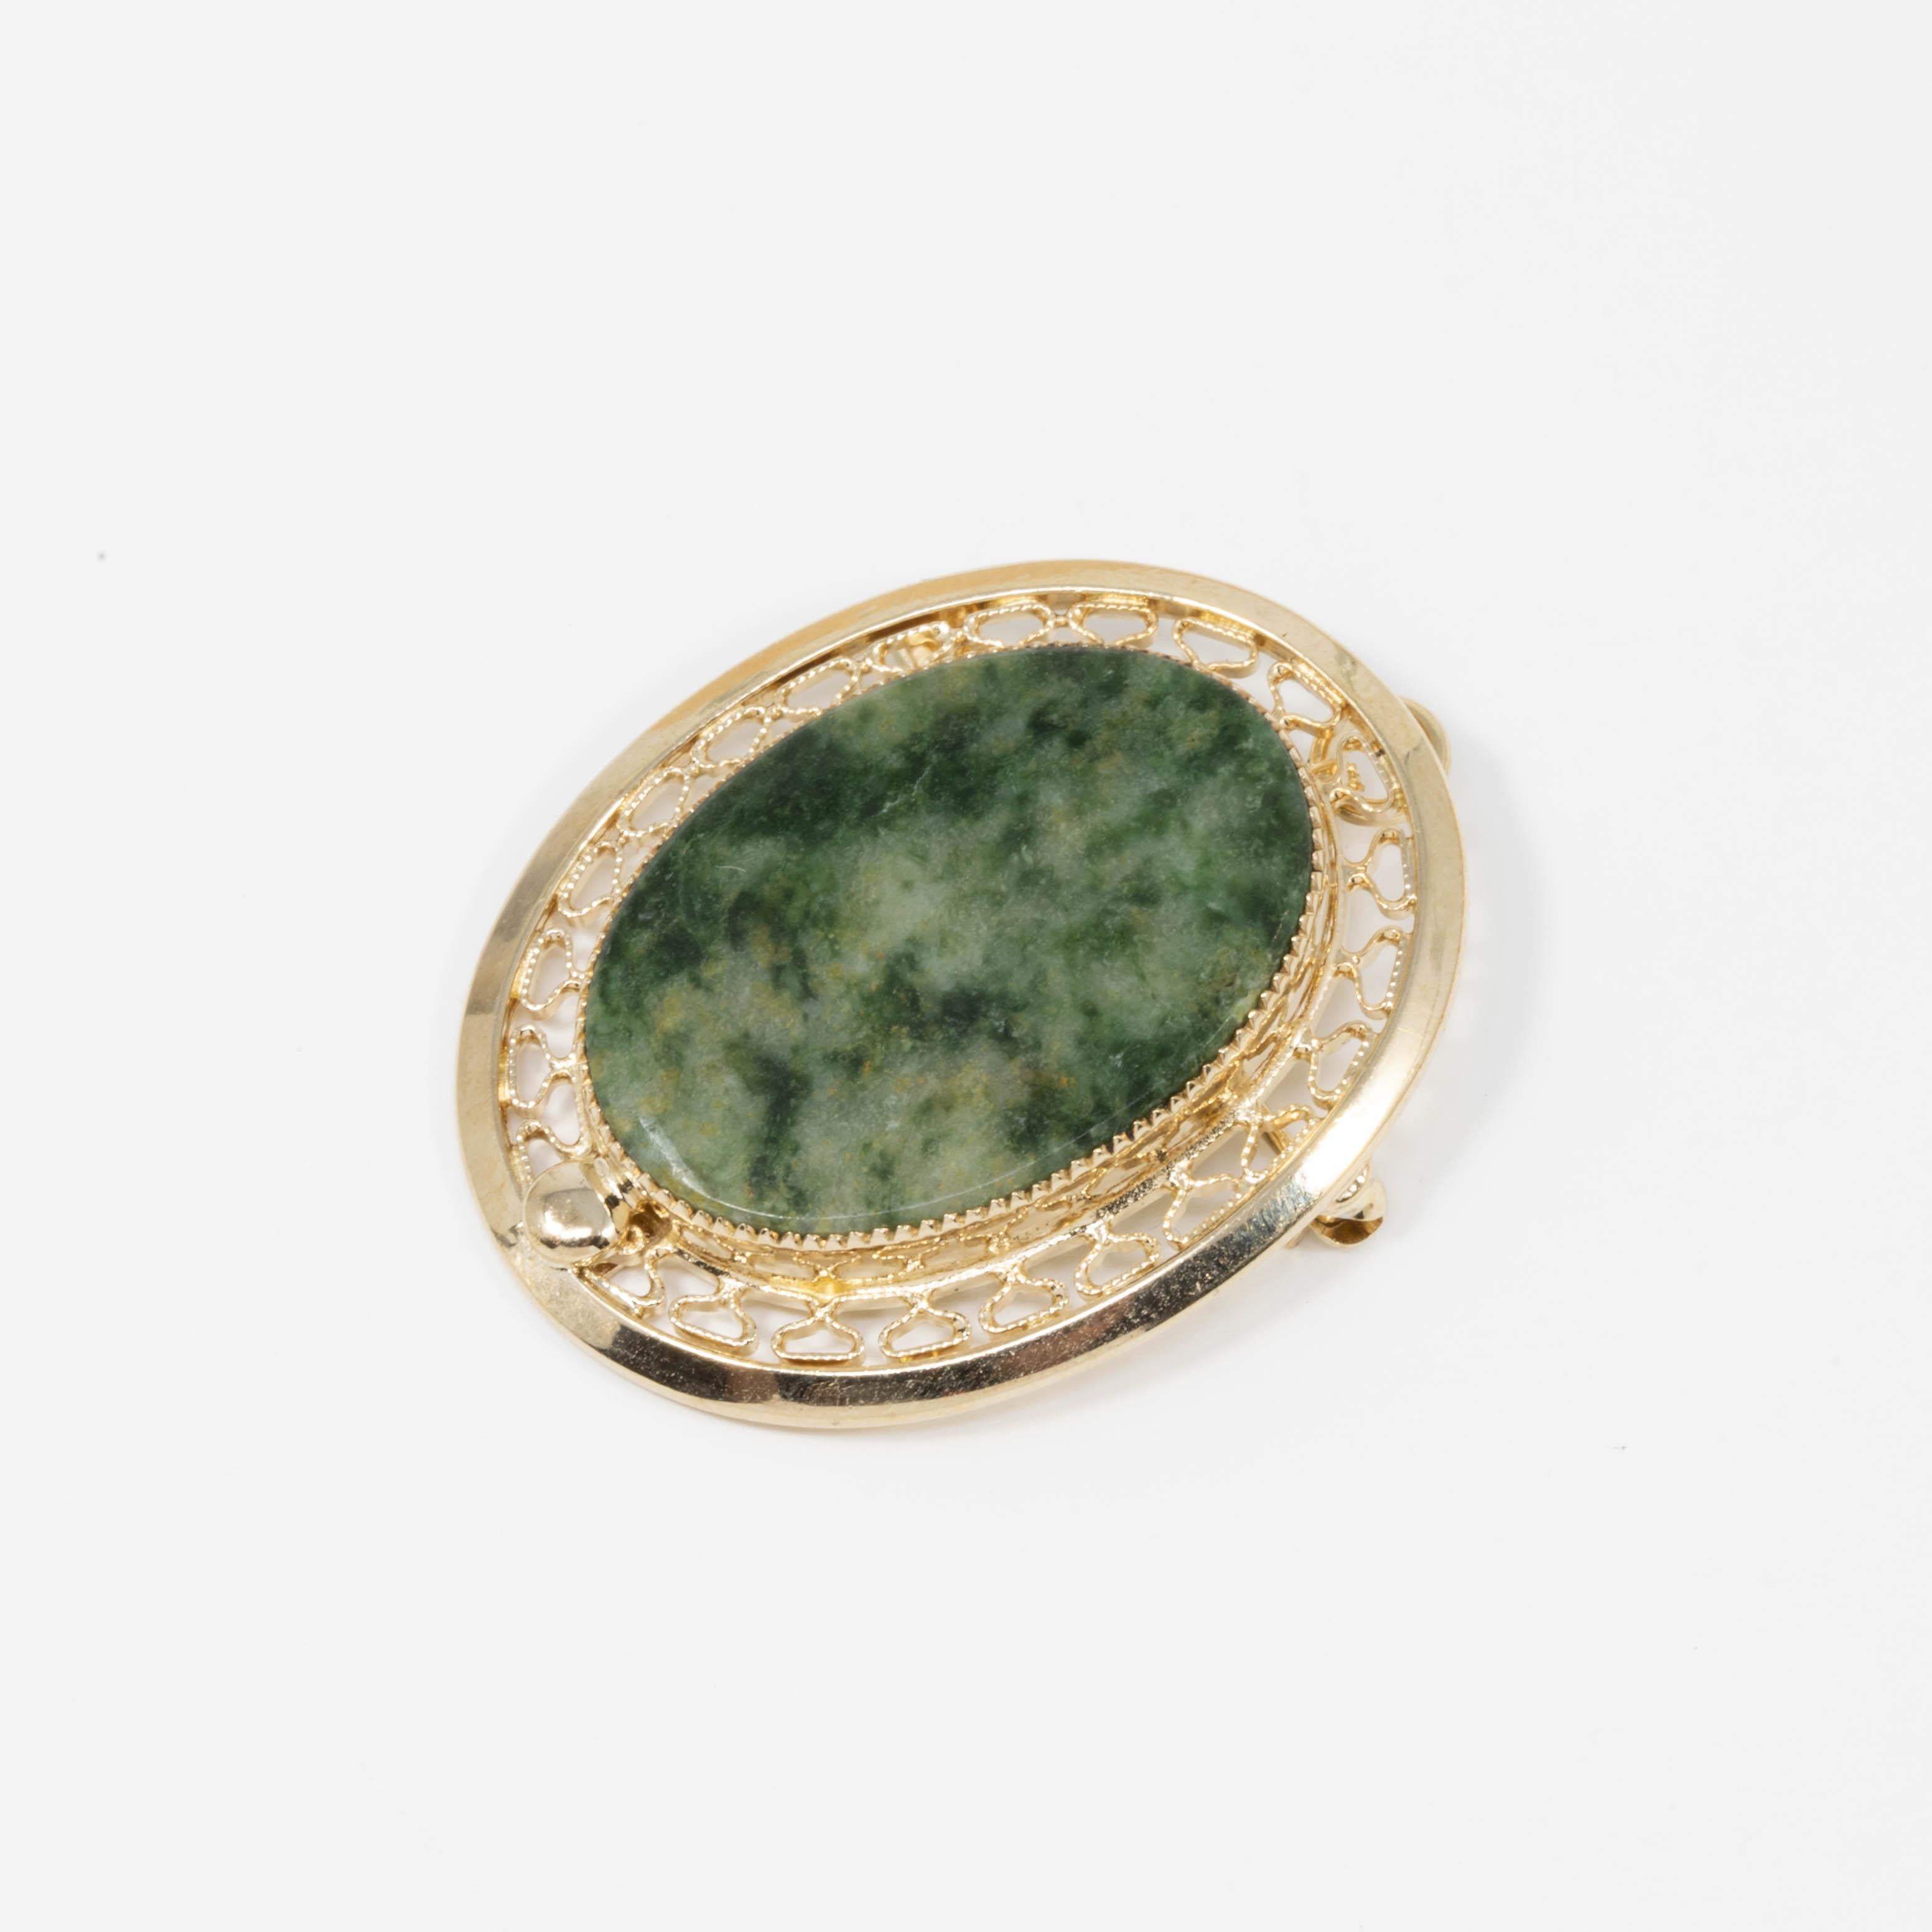 A pin/pendant by Sarah Conventry, featuring a marbled green oval gemstones set in an open back decorative golden bezel.

12K gold filled.

Circa Late 1900s.

Tags, Marks, Hallmarks: Sarah Cov, 1/20 12K GF